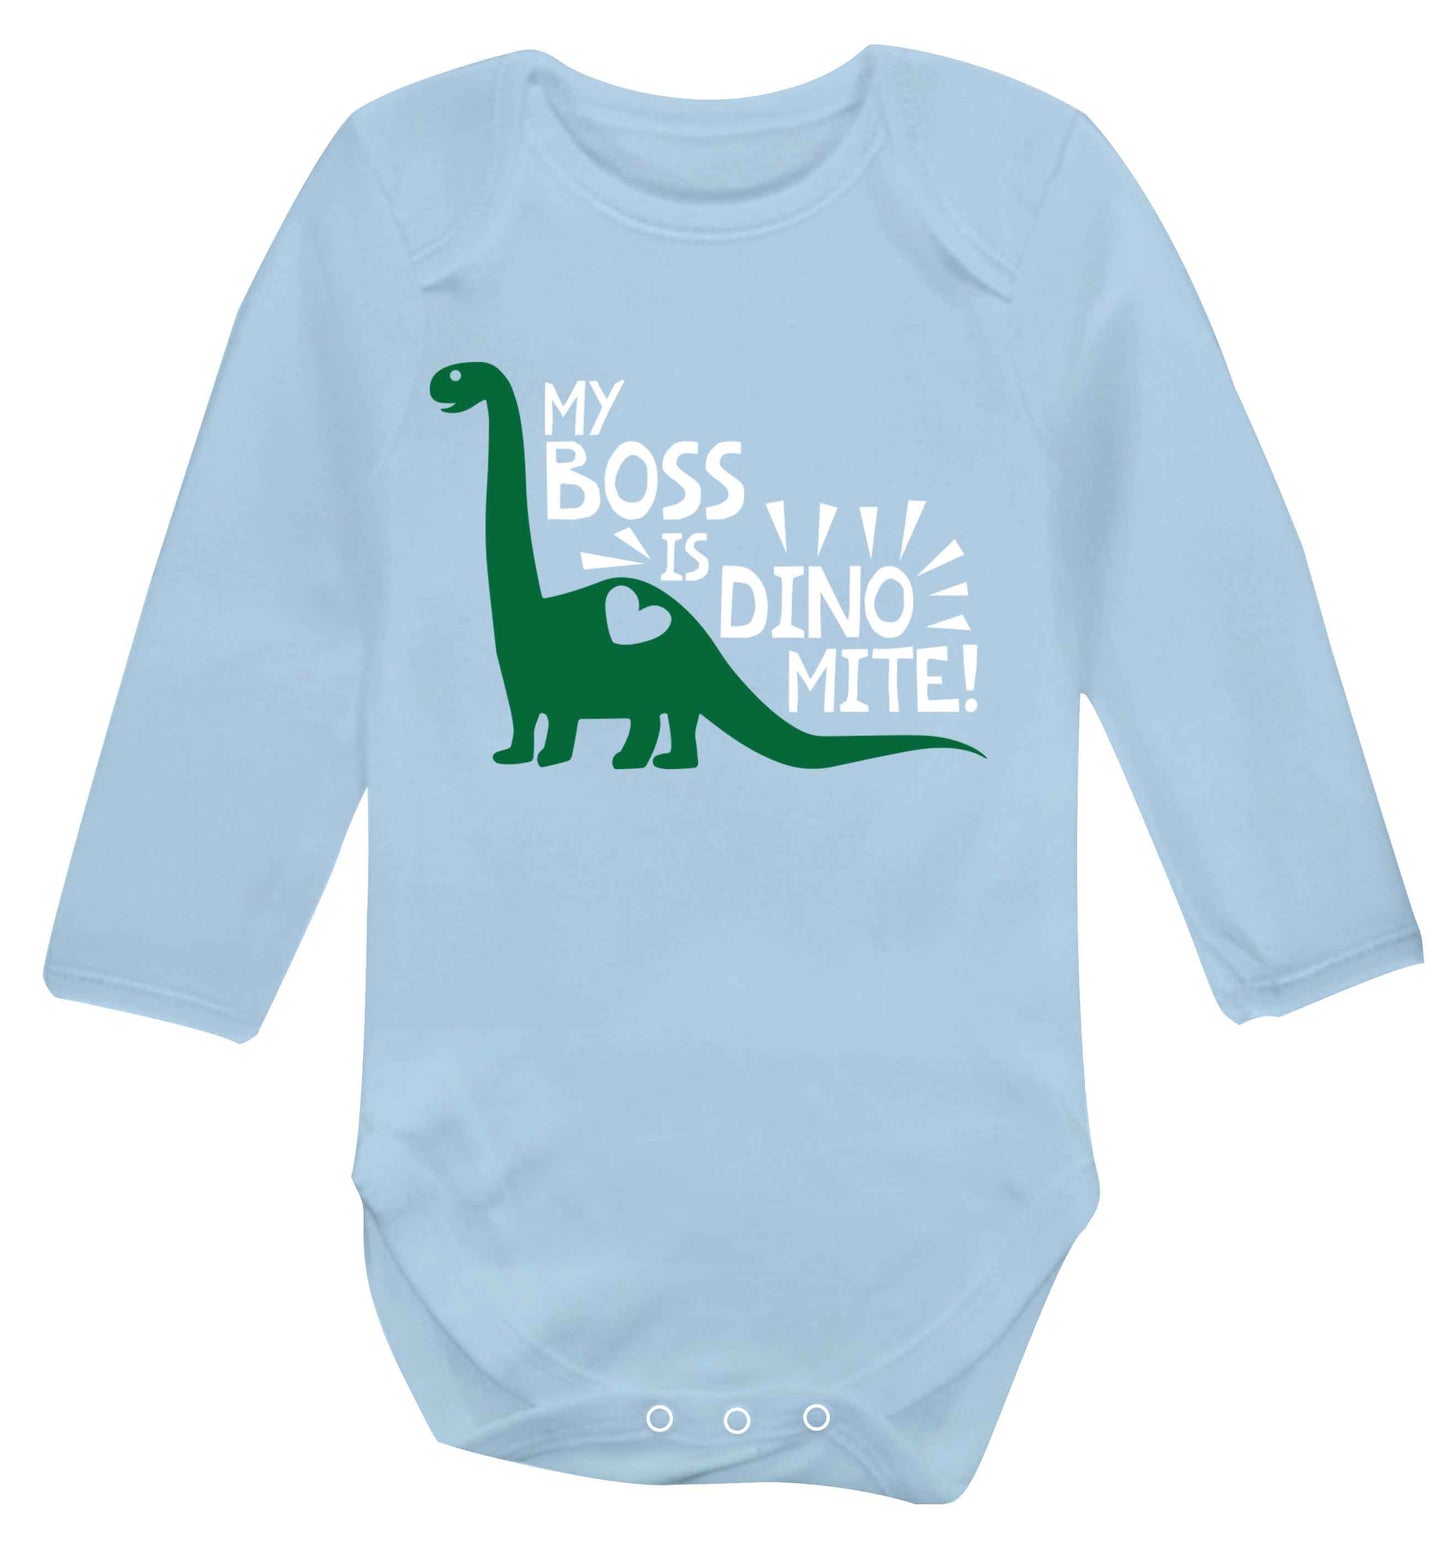 My boss is dinomite! Baby Vest long sleeved pale blue 6-12 months